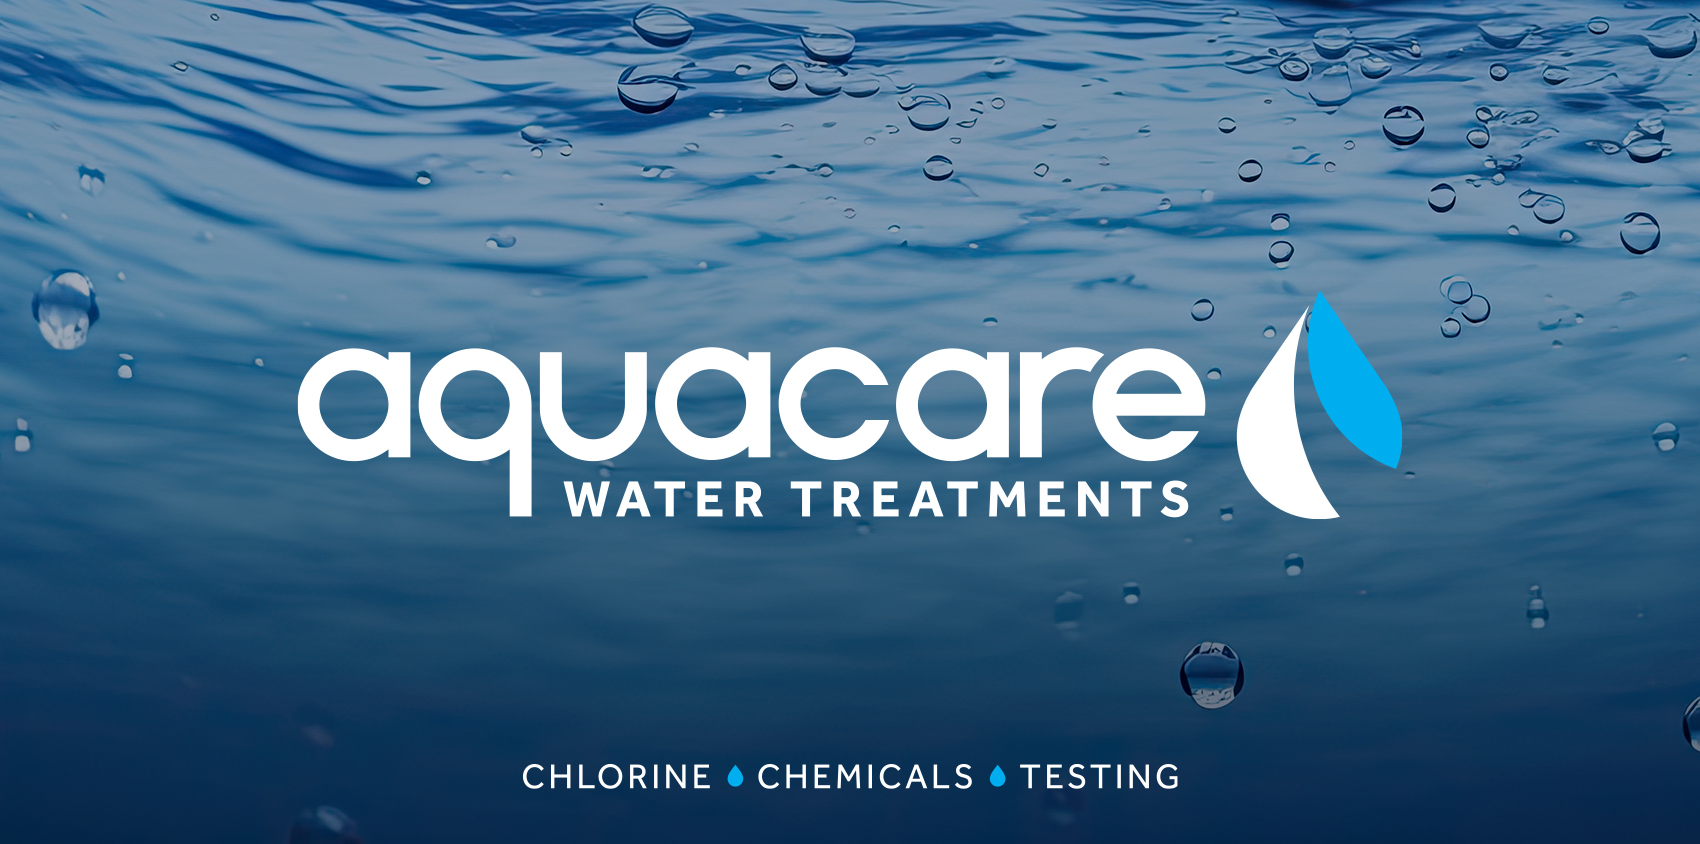 aquacare water treatments case study banner